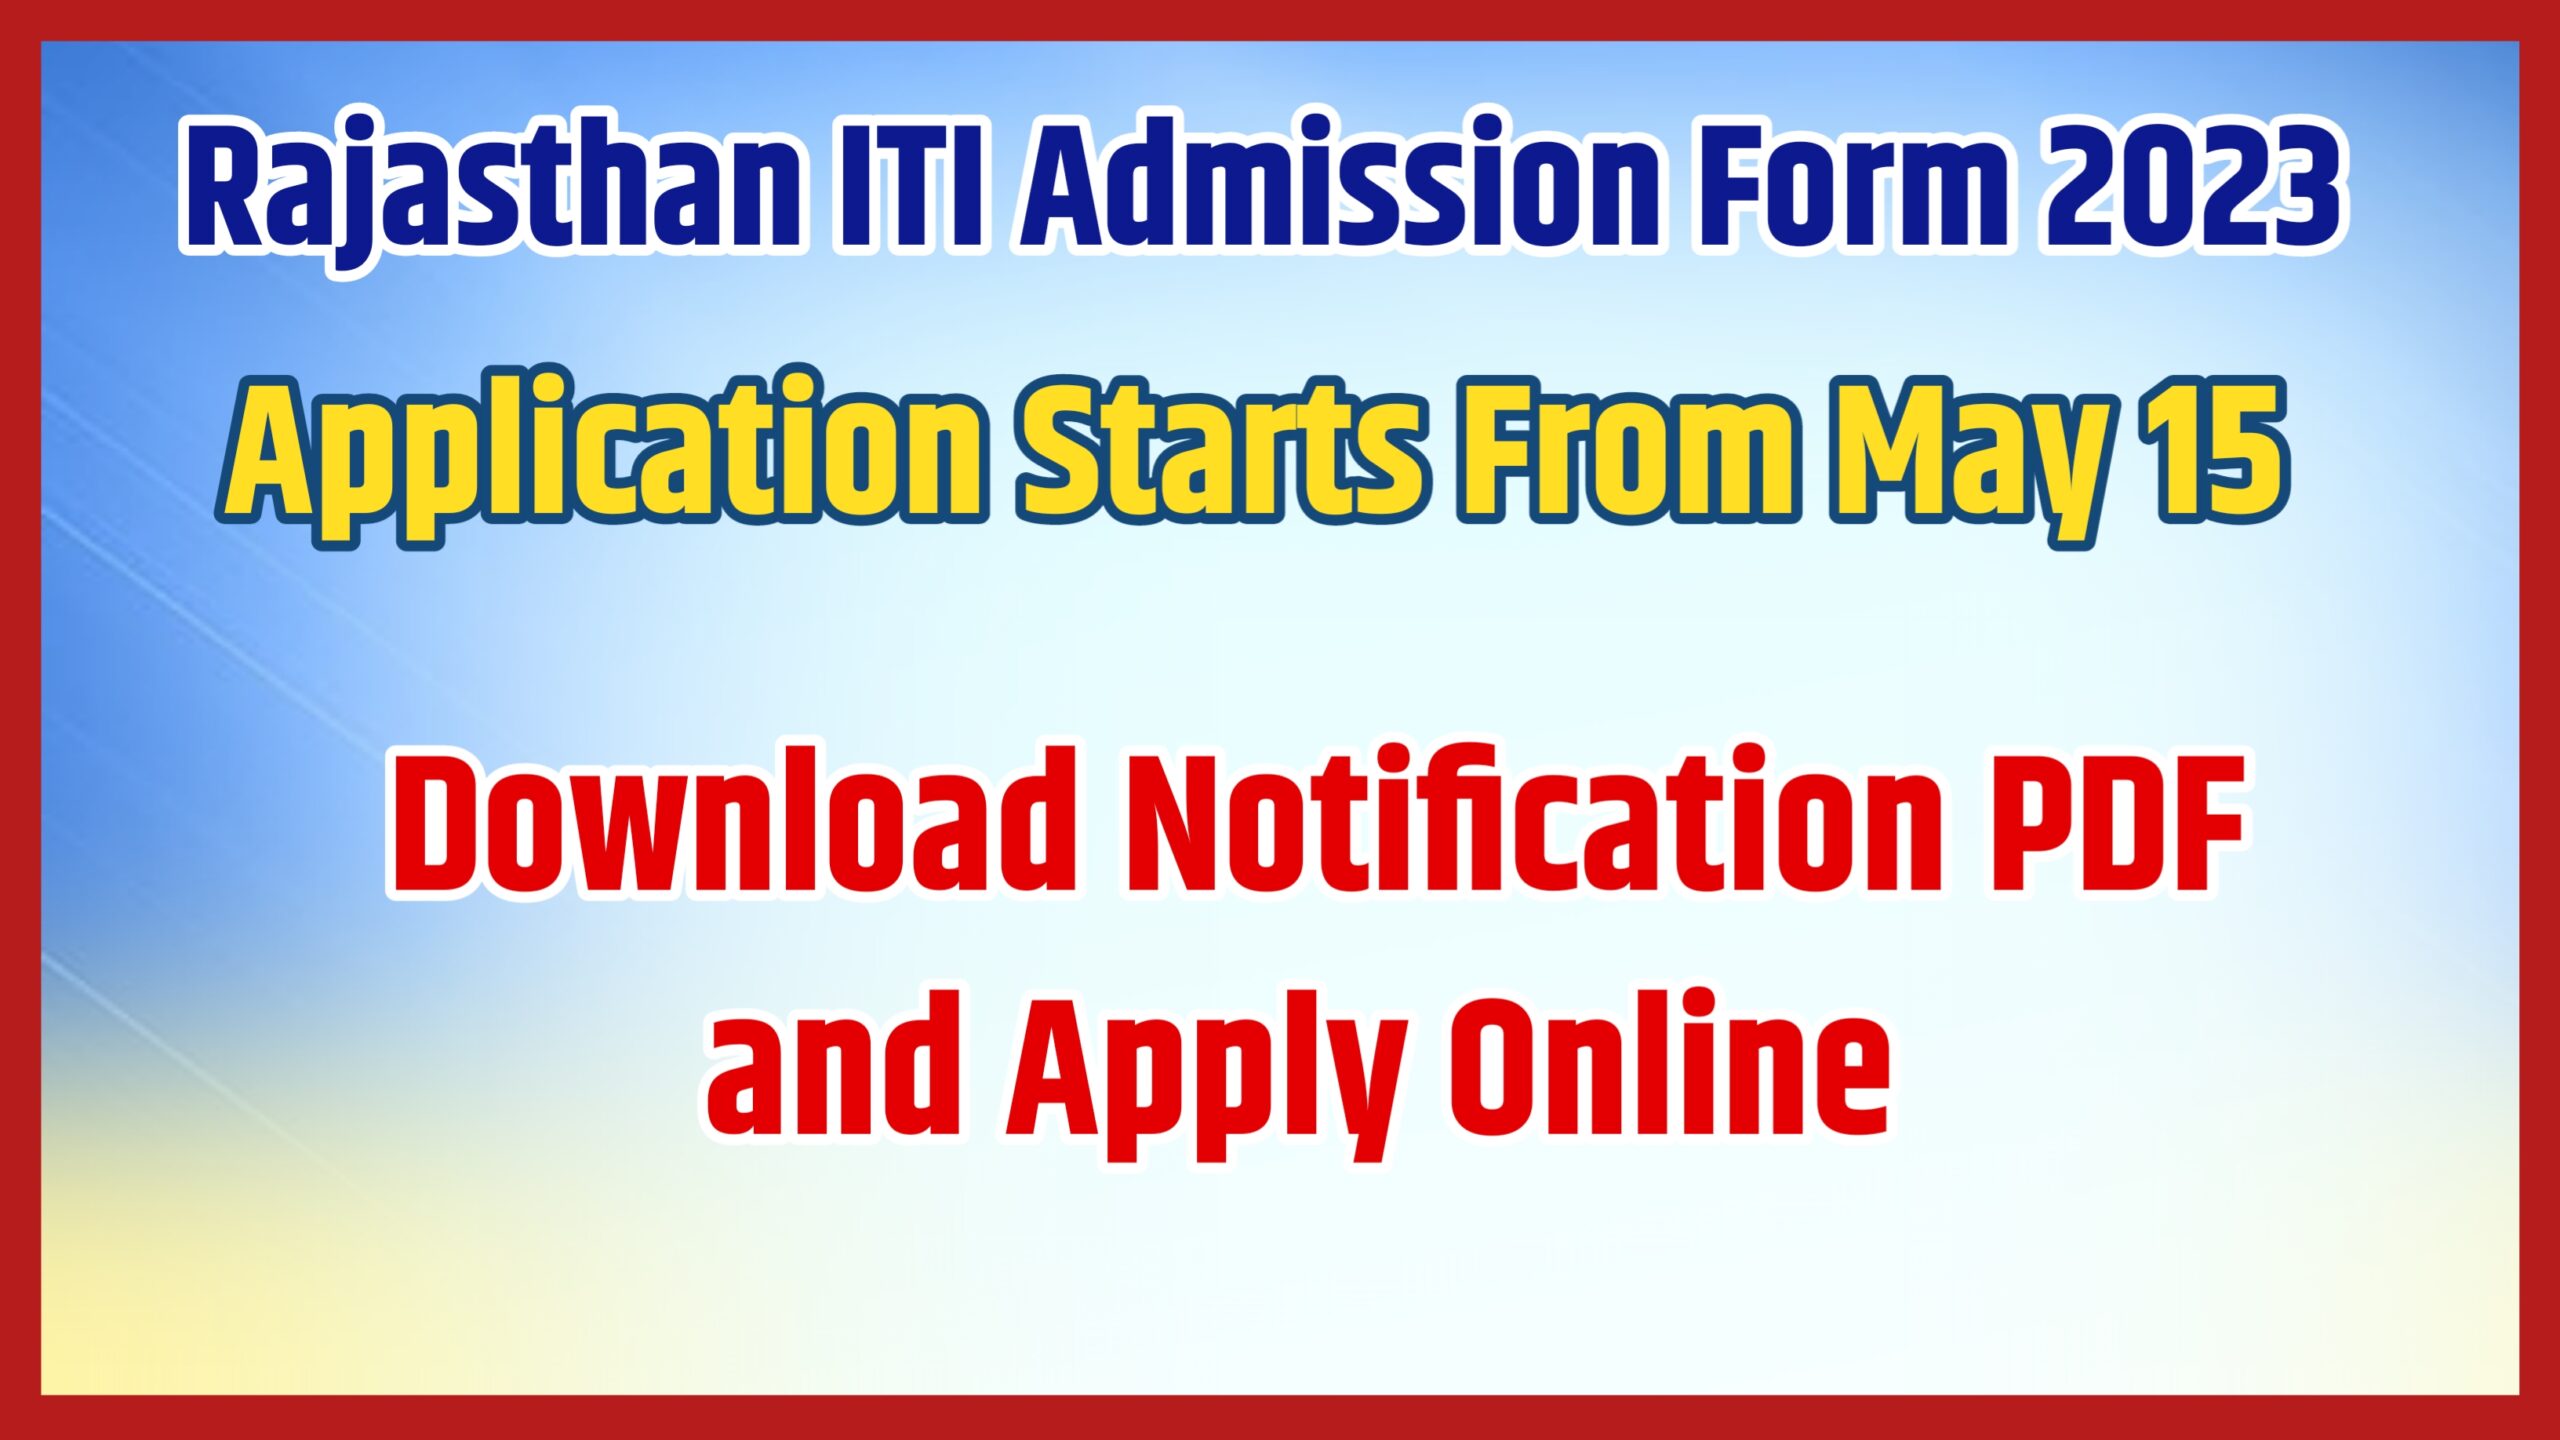 Notification of Rajasthan ITI Admission Form 2023 released, application starts from May 15